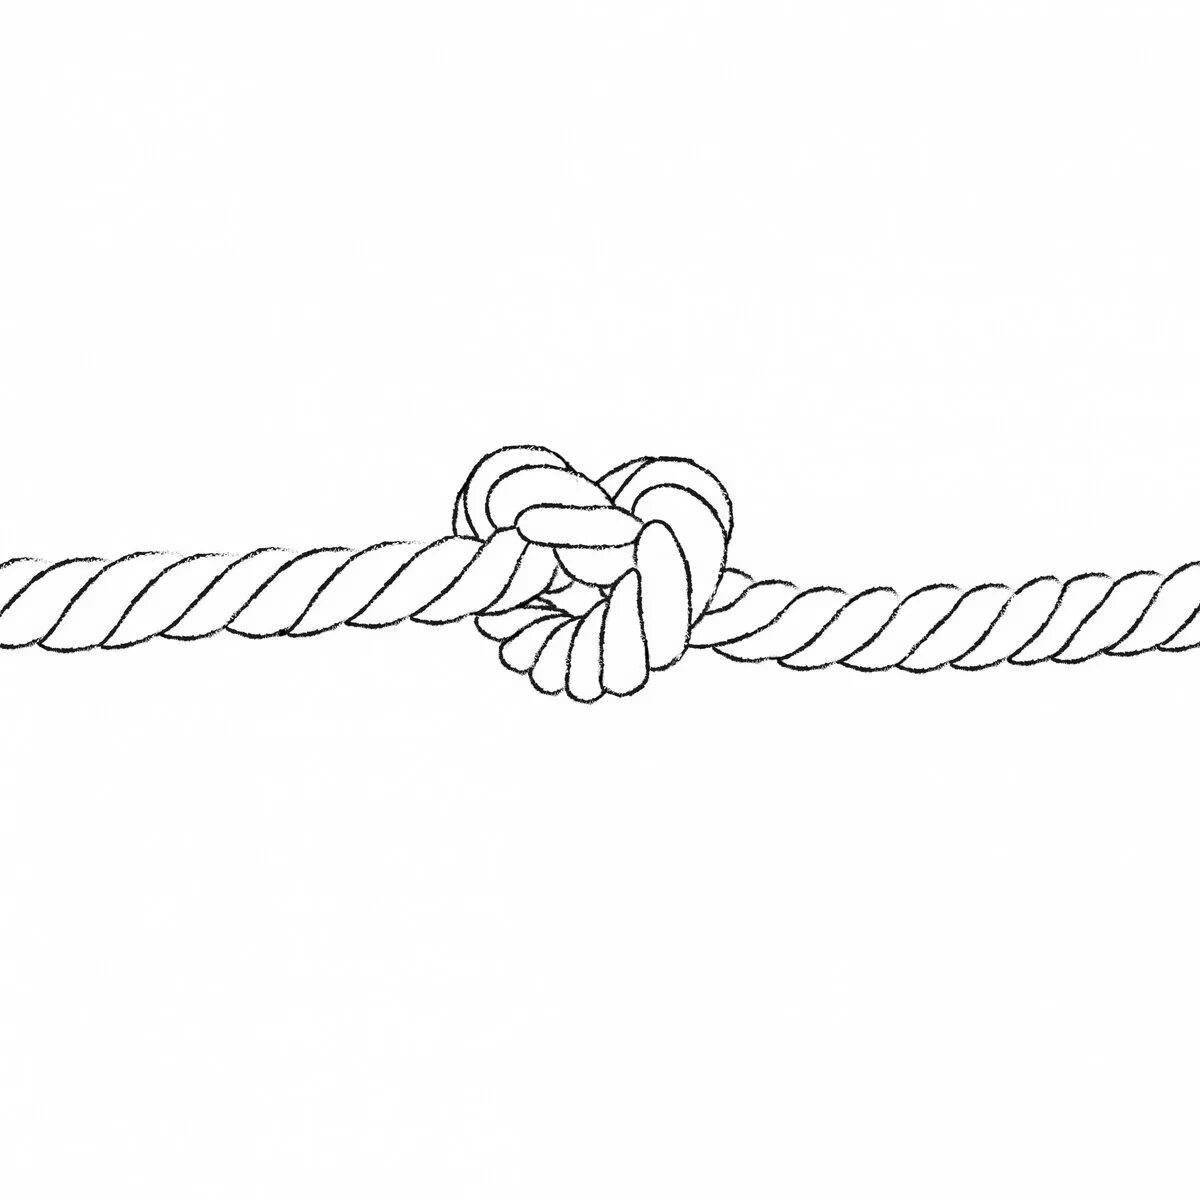 Colorful shiny rope coloring book